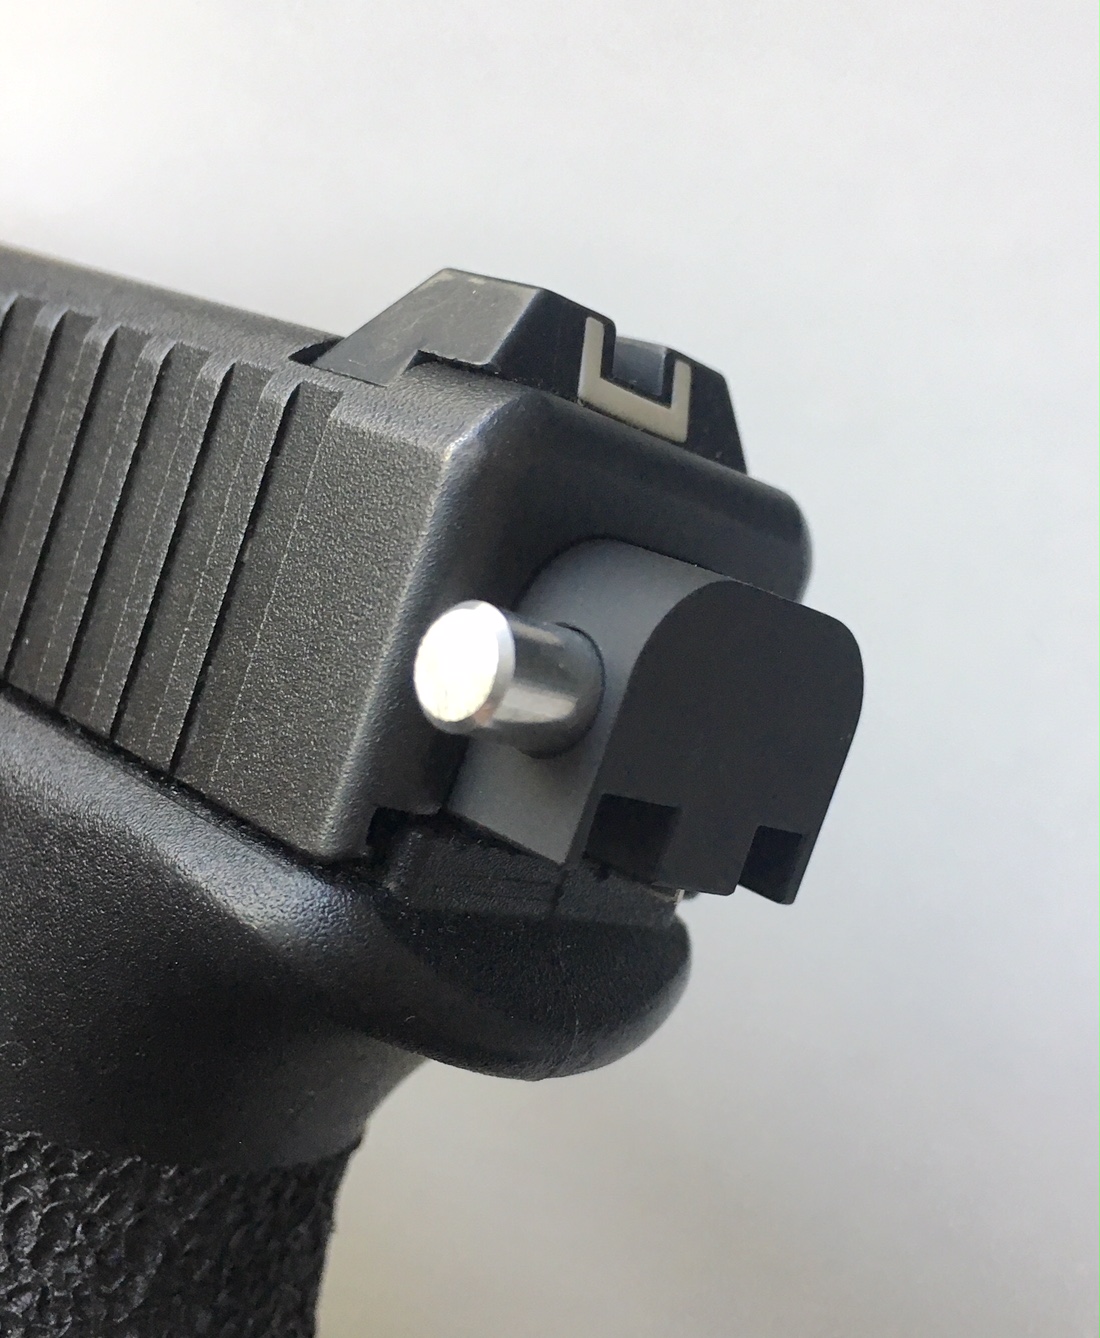 Glock Full Auto Switch From China For Sale free images, download Glock Full...